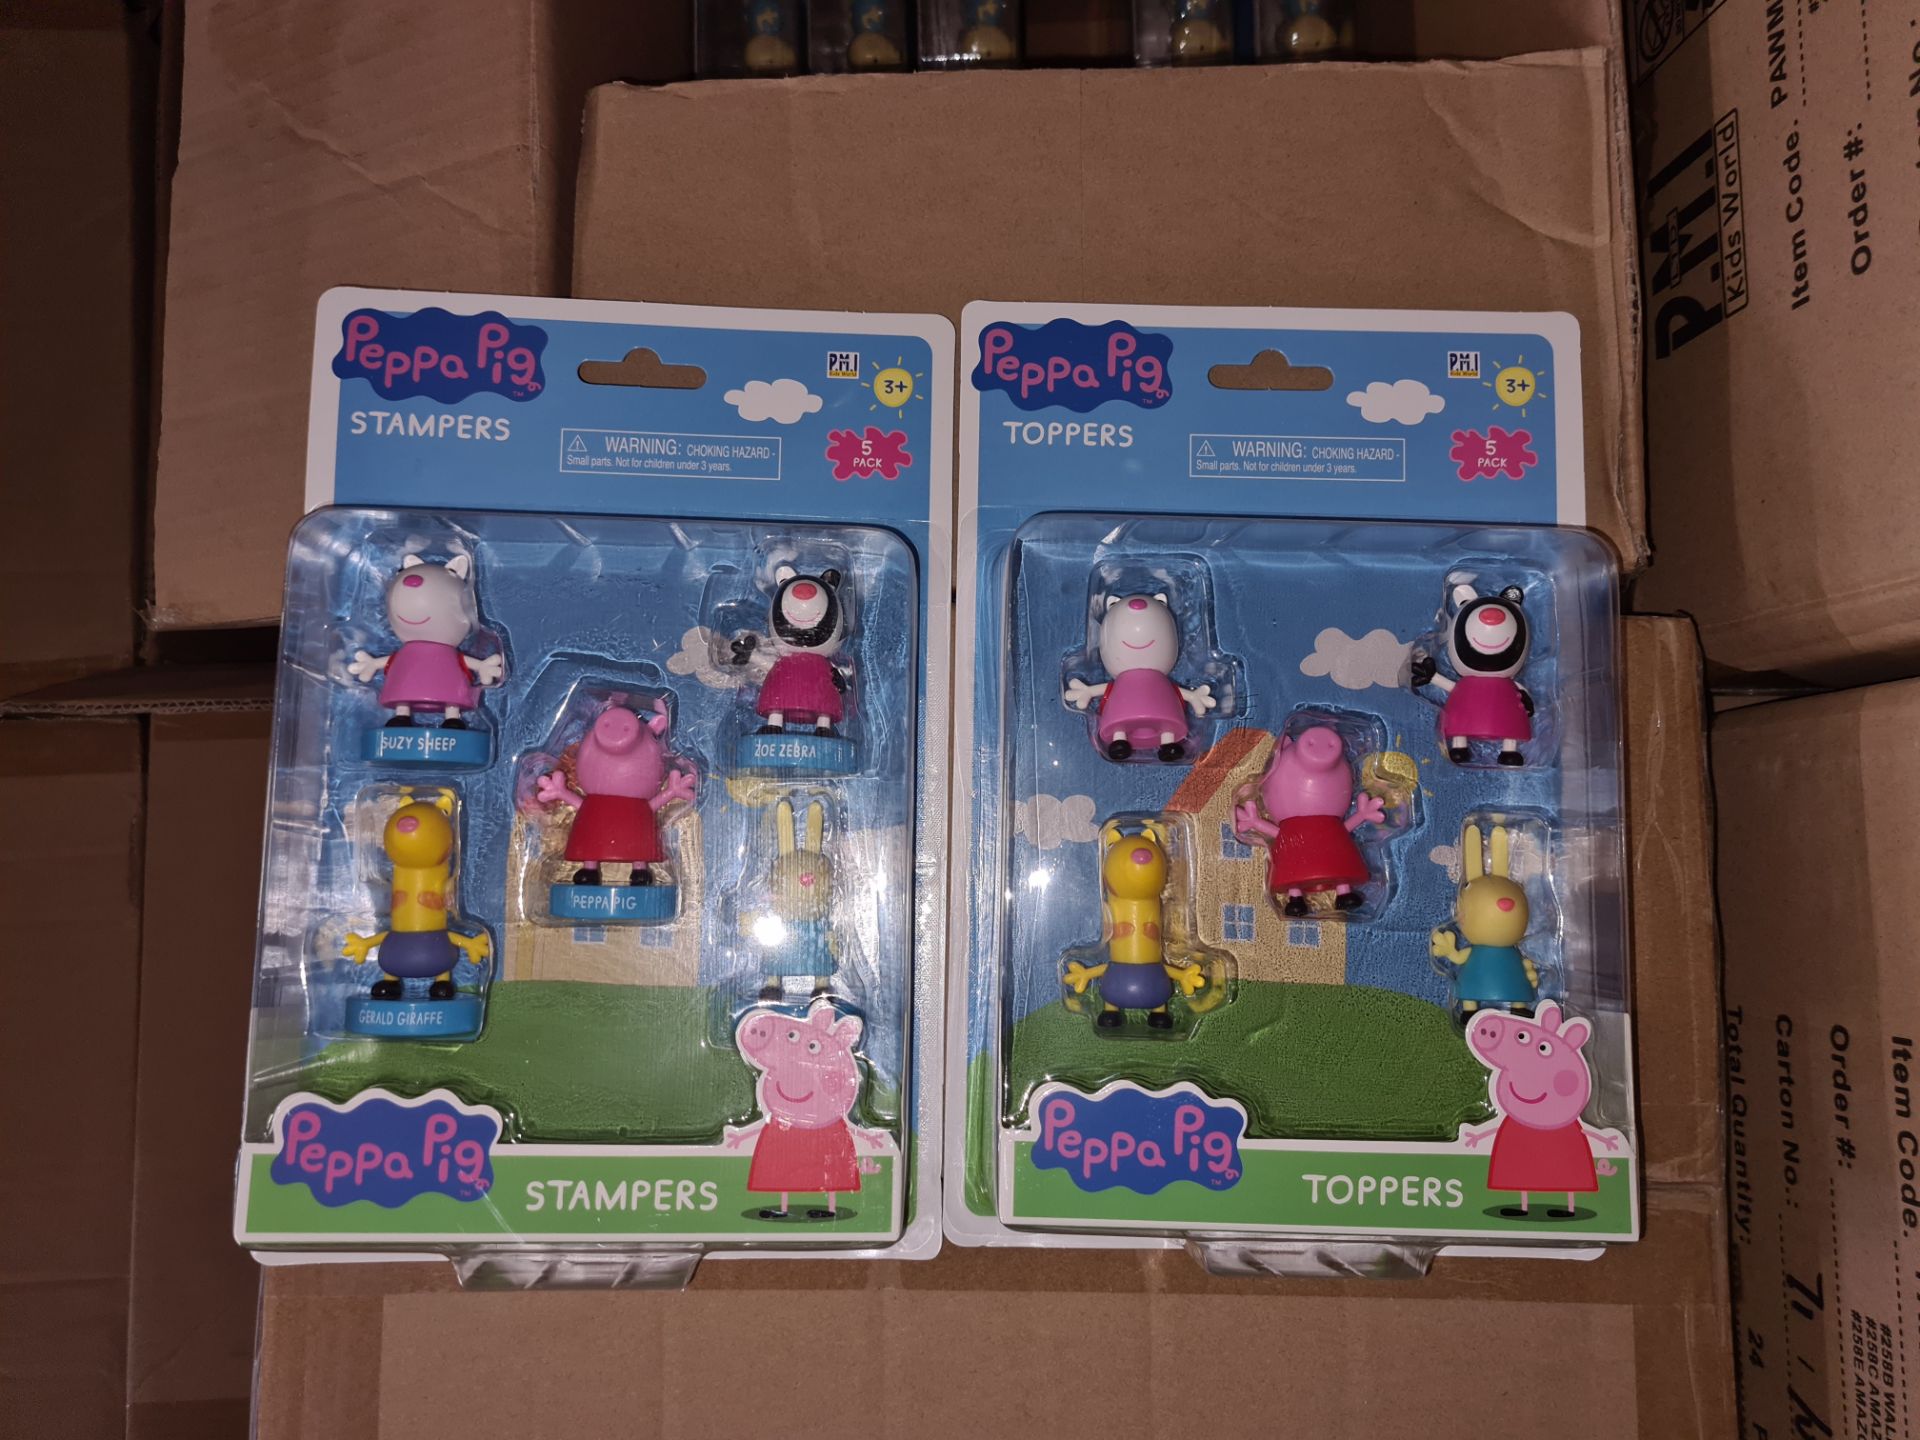 100 x Packs Peppa Pig Stampers & Toppers | Total RRP £700 - Image 2 of 2